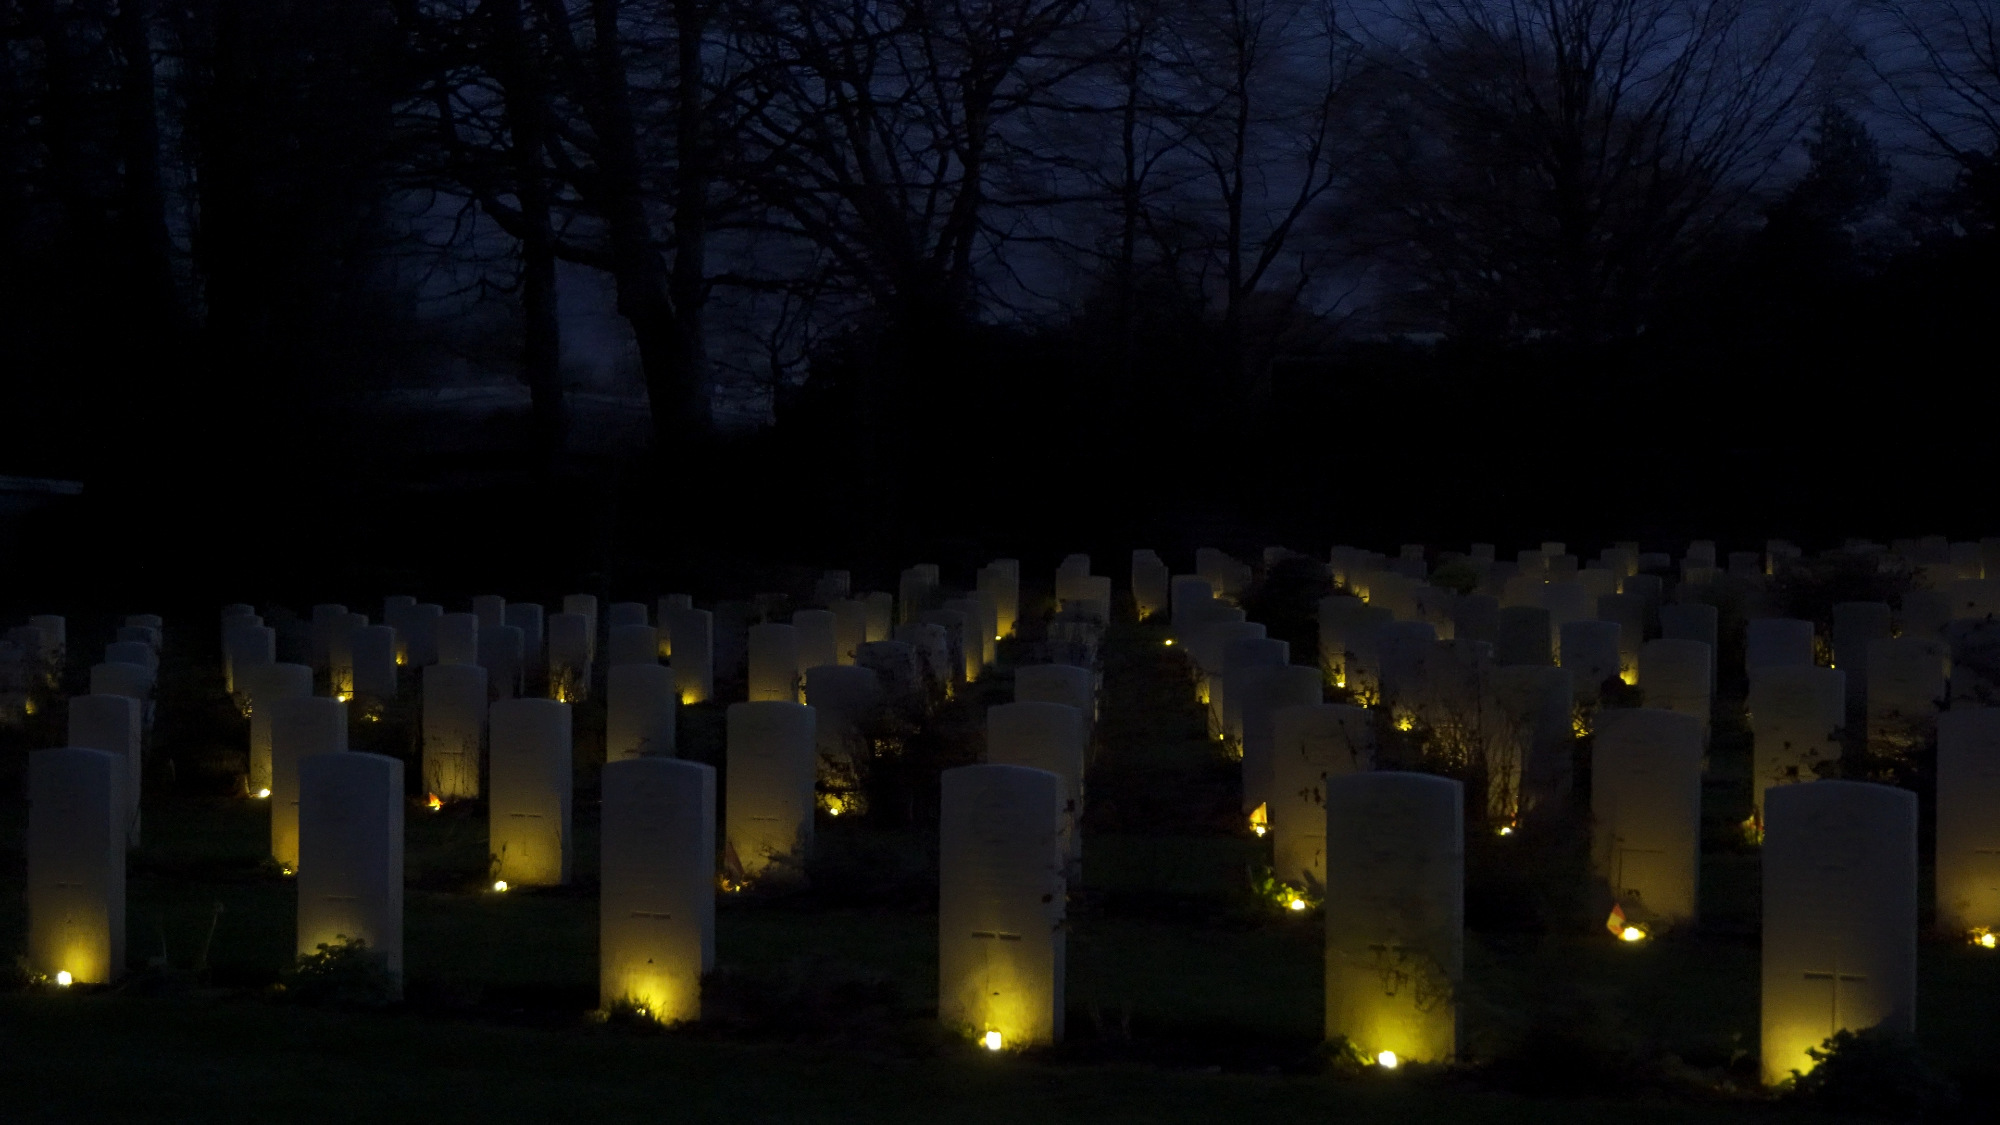 Candelit Christmas Remembrance at Stonefall Cemetery, Harrogate